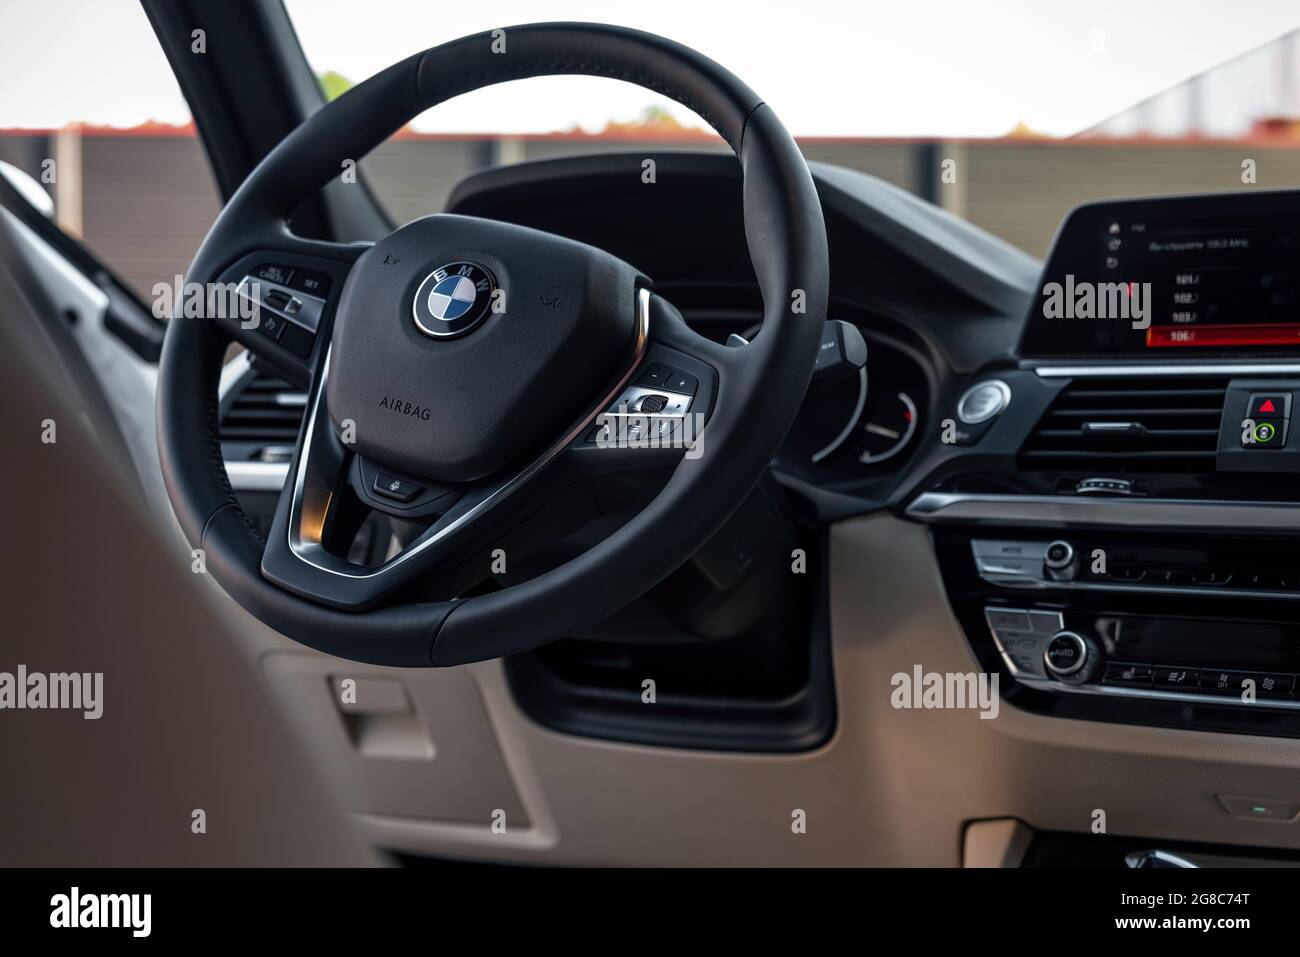 Ukraine, Odessa July 8 - 2021: Interior view with steering wheel and  dashboard of luxury expensive new BMW X3 car Stock Photo - Alamy